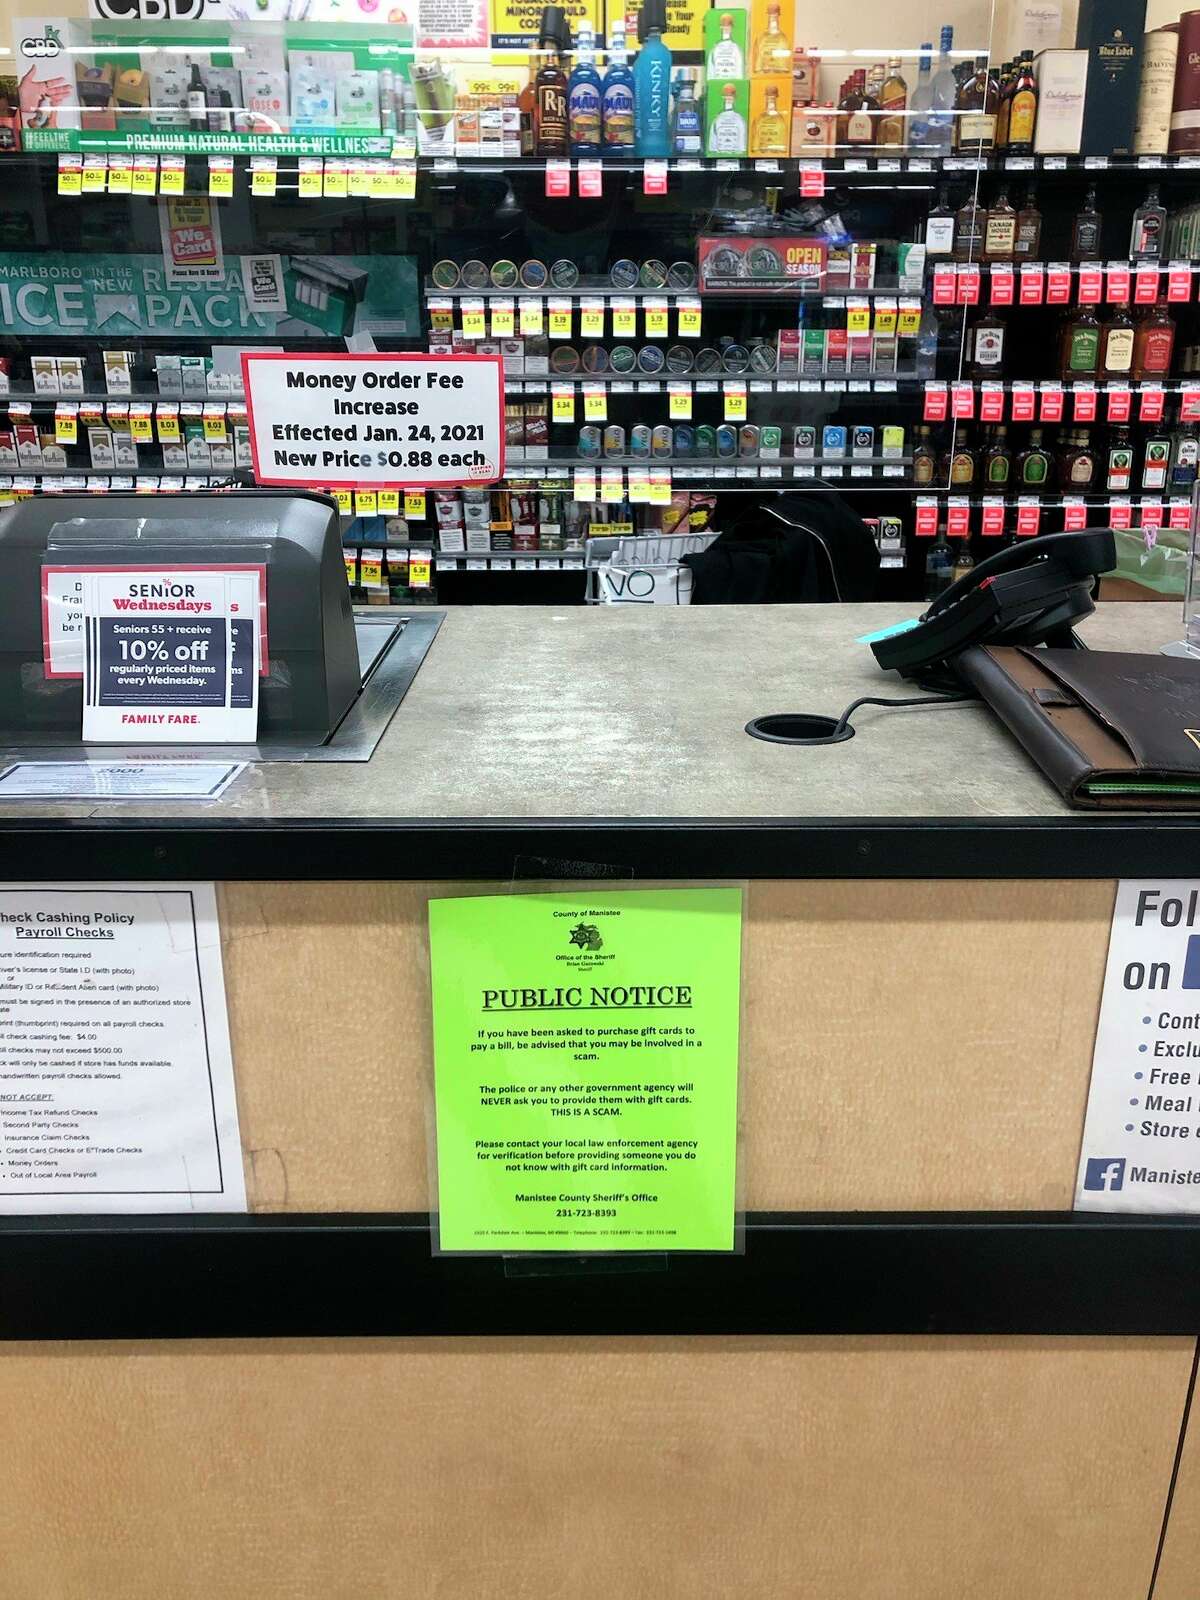 Public notices from the Manistee County Sheriff's Office have started being placed at some businesses in the county that sell gift cards in an effort to warn people and prevent them falling victim to scams. (Courtesy photo)